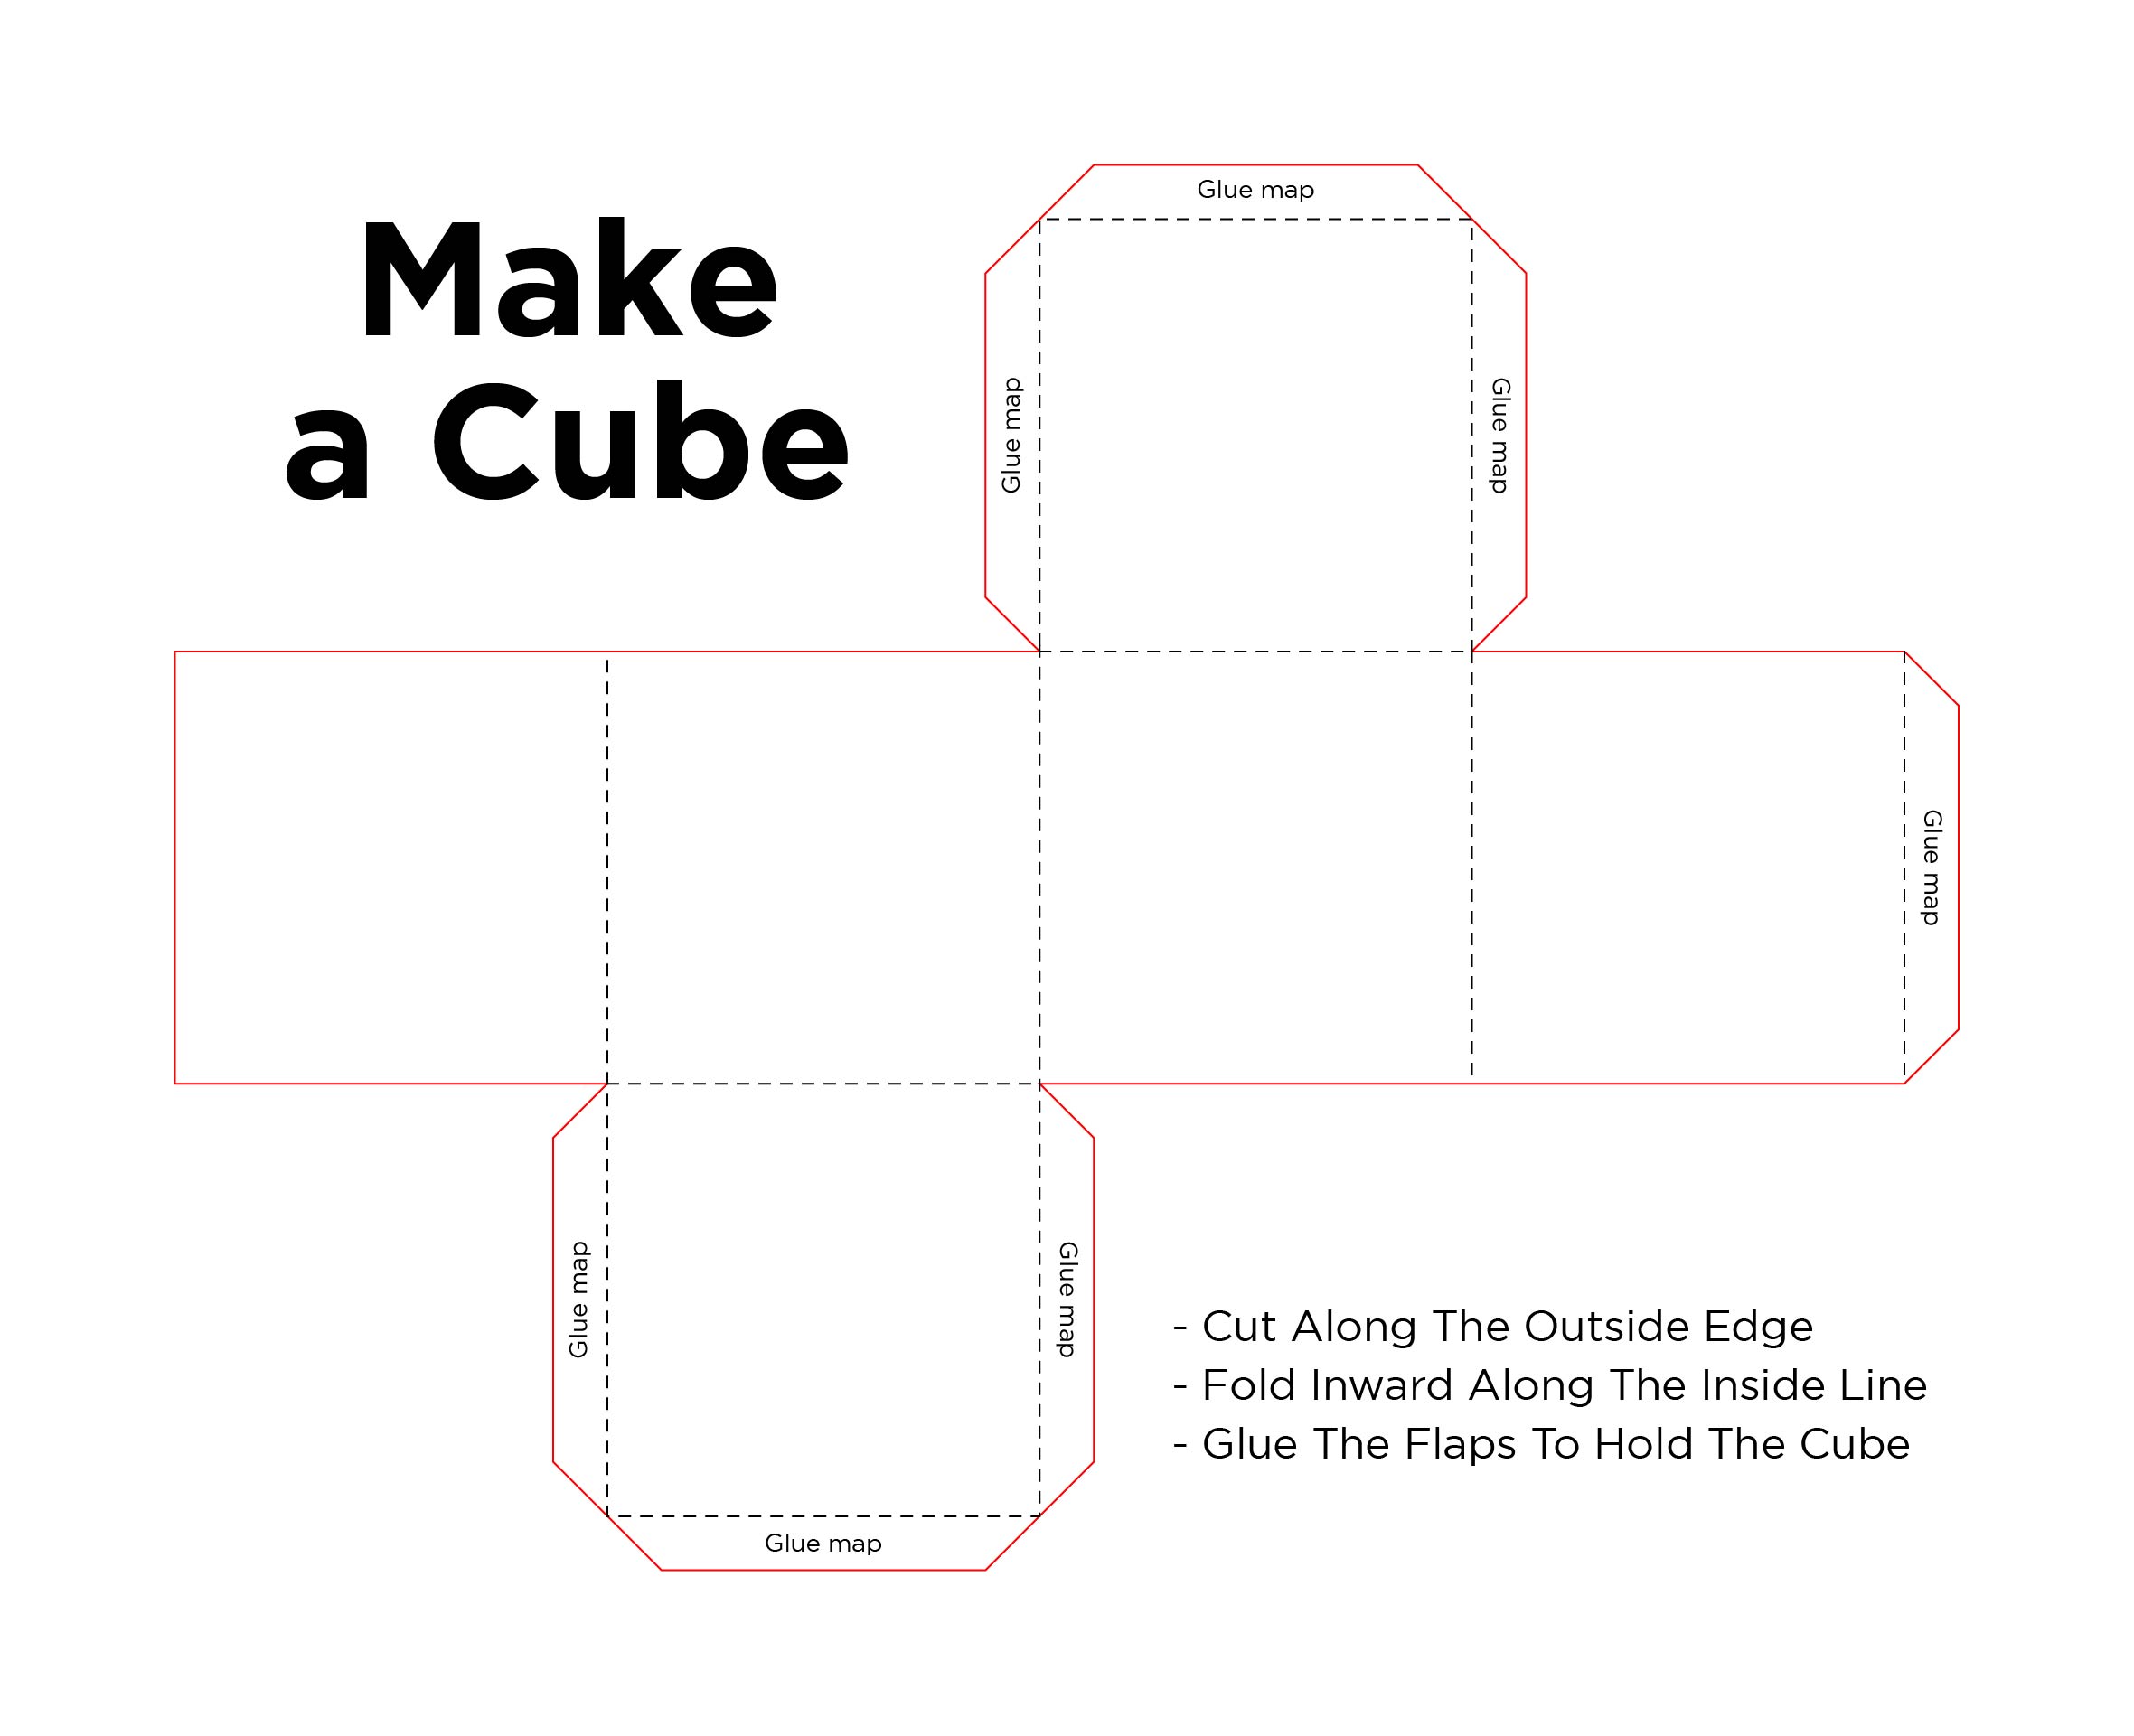 Cube Template Printable